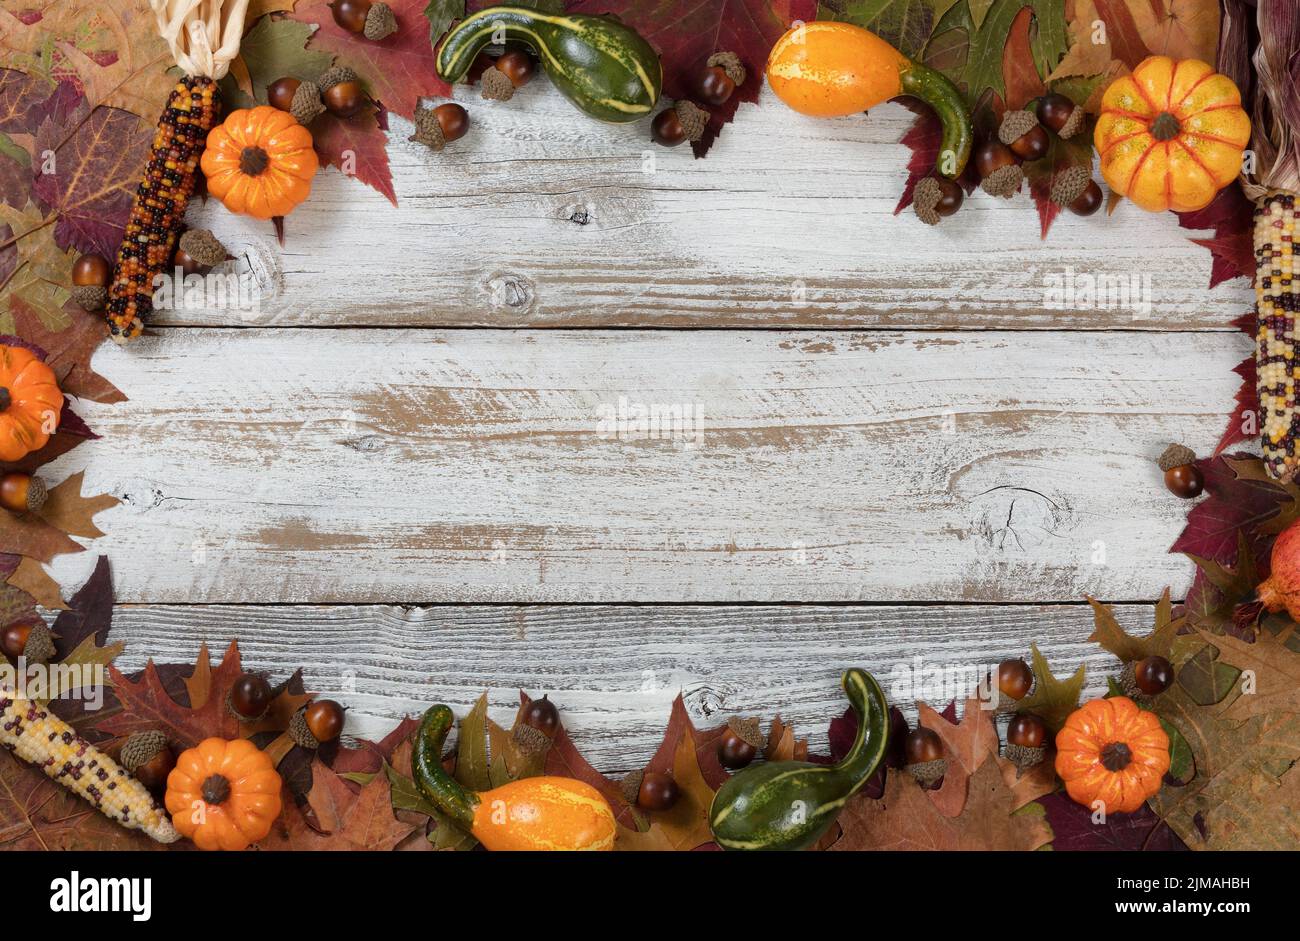 Complete circle border of Autumn foliage with other fall decorations on white rustic wooden boards Stock Photo